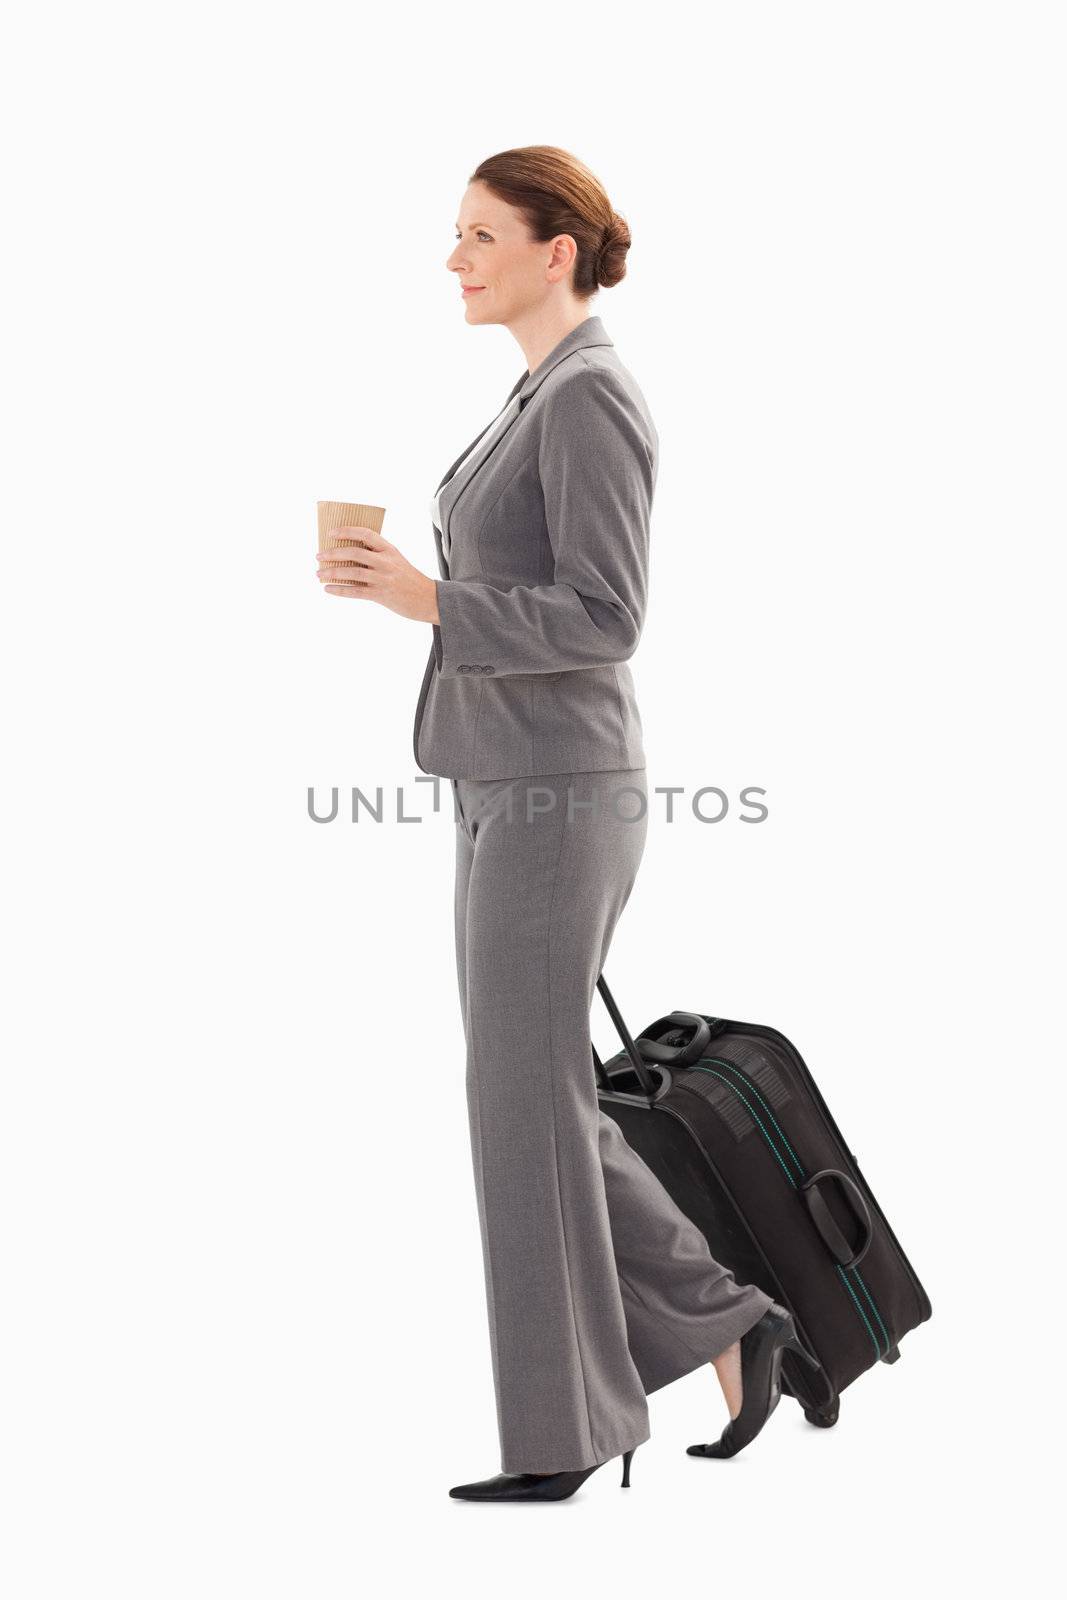 Businesswoman with suitcase holding coffee by Wavebreakmedia